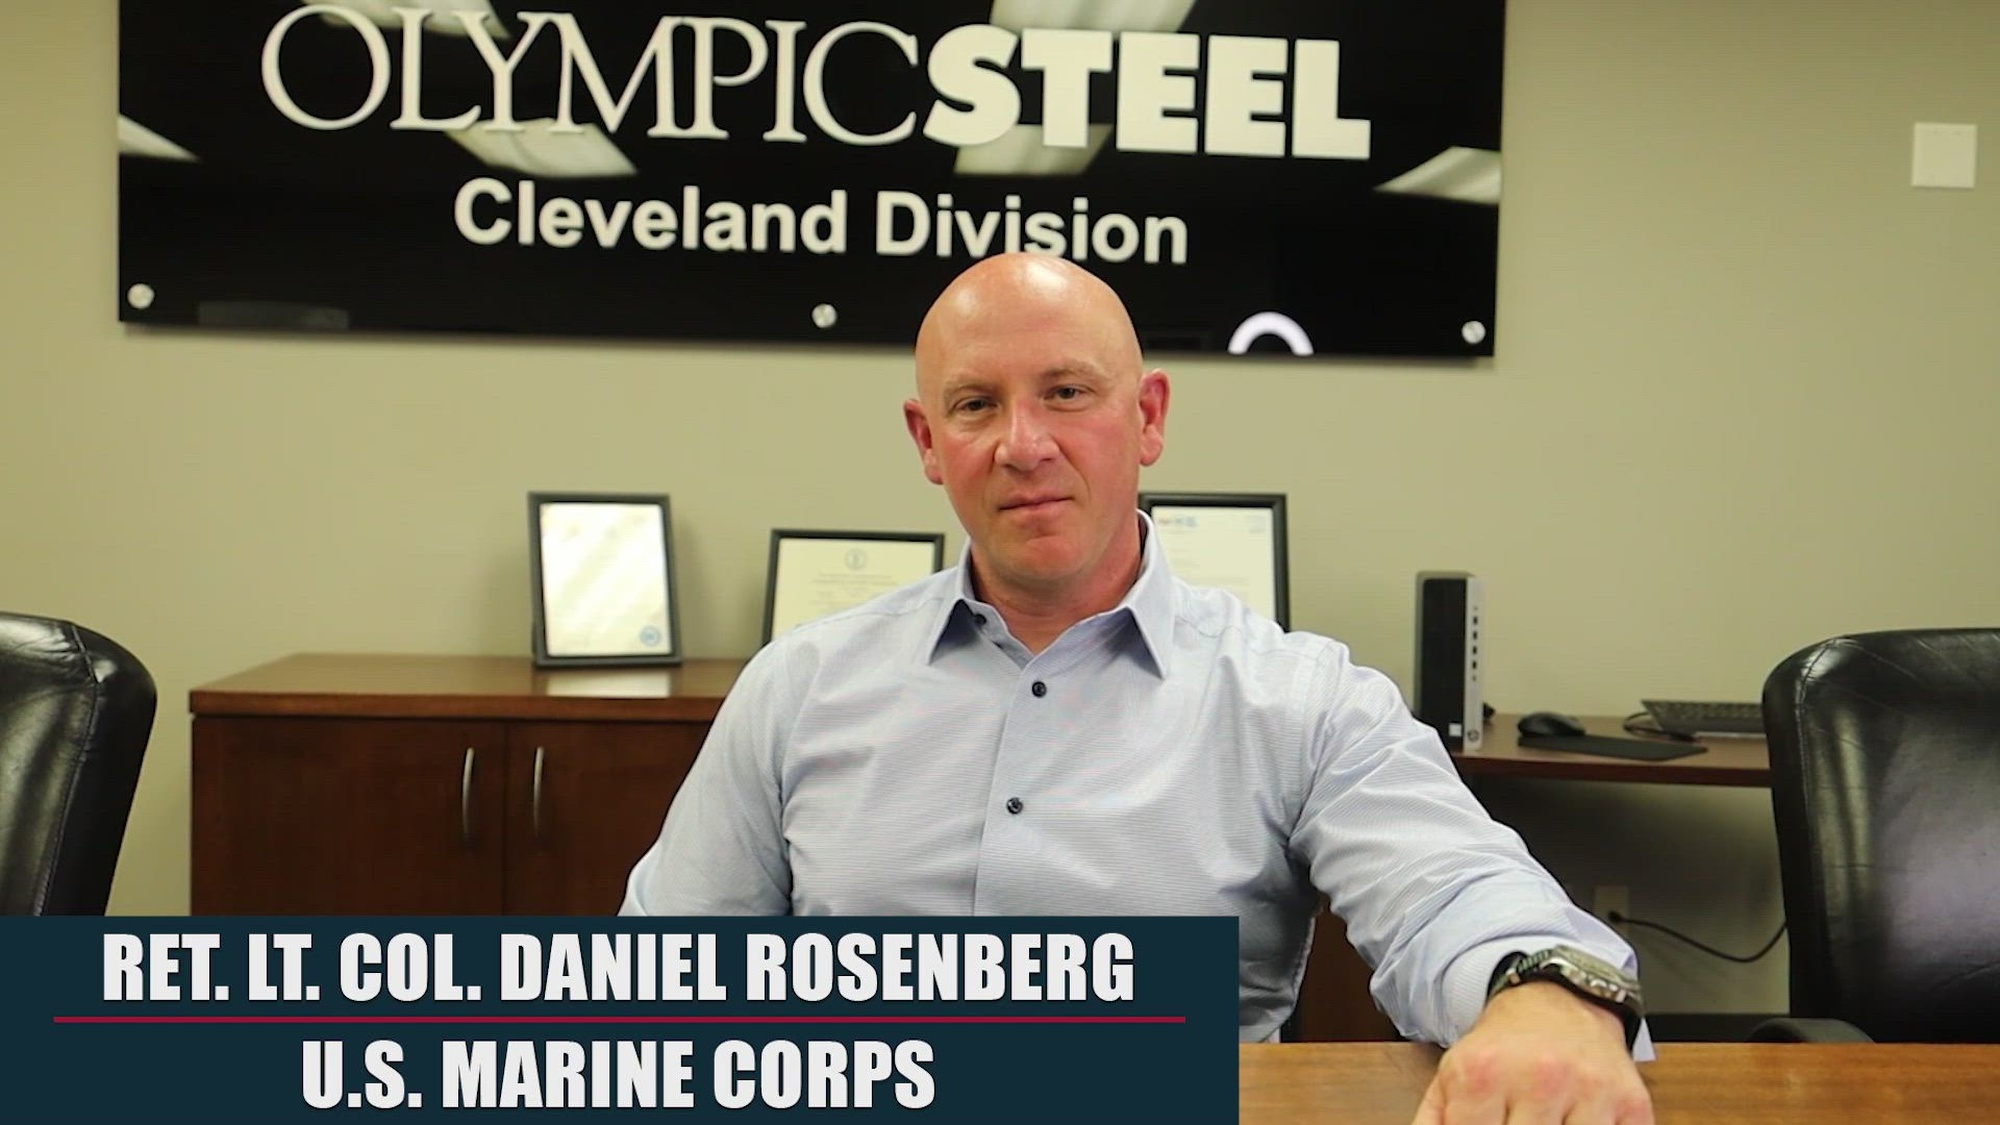 Retired U.S. Marine Corps Lt. Col. Daniel Rosenberg speaks about his transition from the Marine Corps. Rosenberg is now the director of Integration and Organizational Development at Olympic Steel, headquartered in Cleveland, OH. (U.S. Marine Corps video by Sgt. Nello Miele)